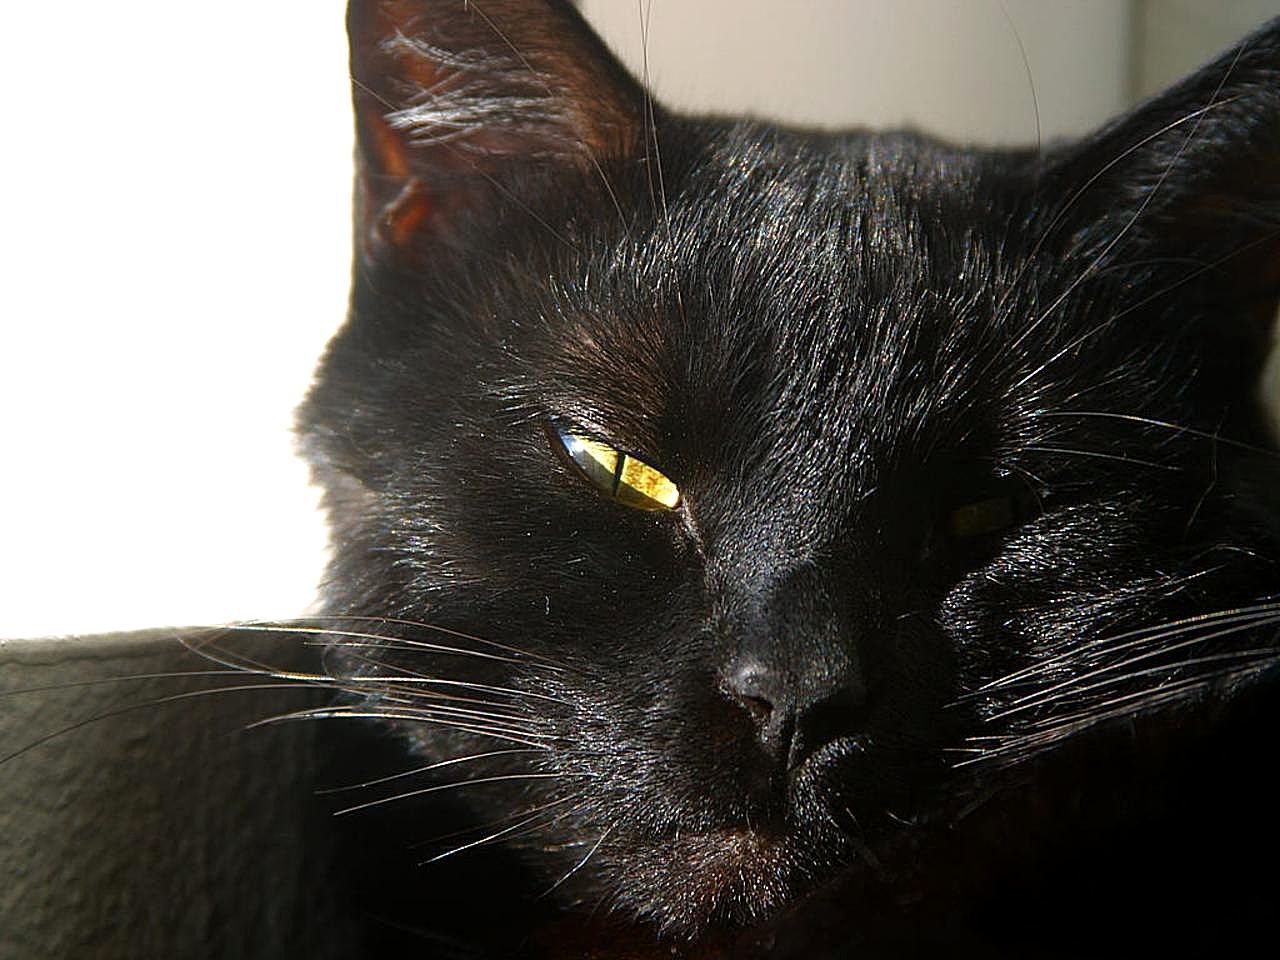 Photographs of Black Furry Cats